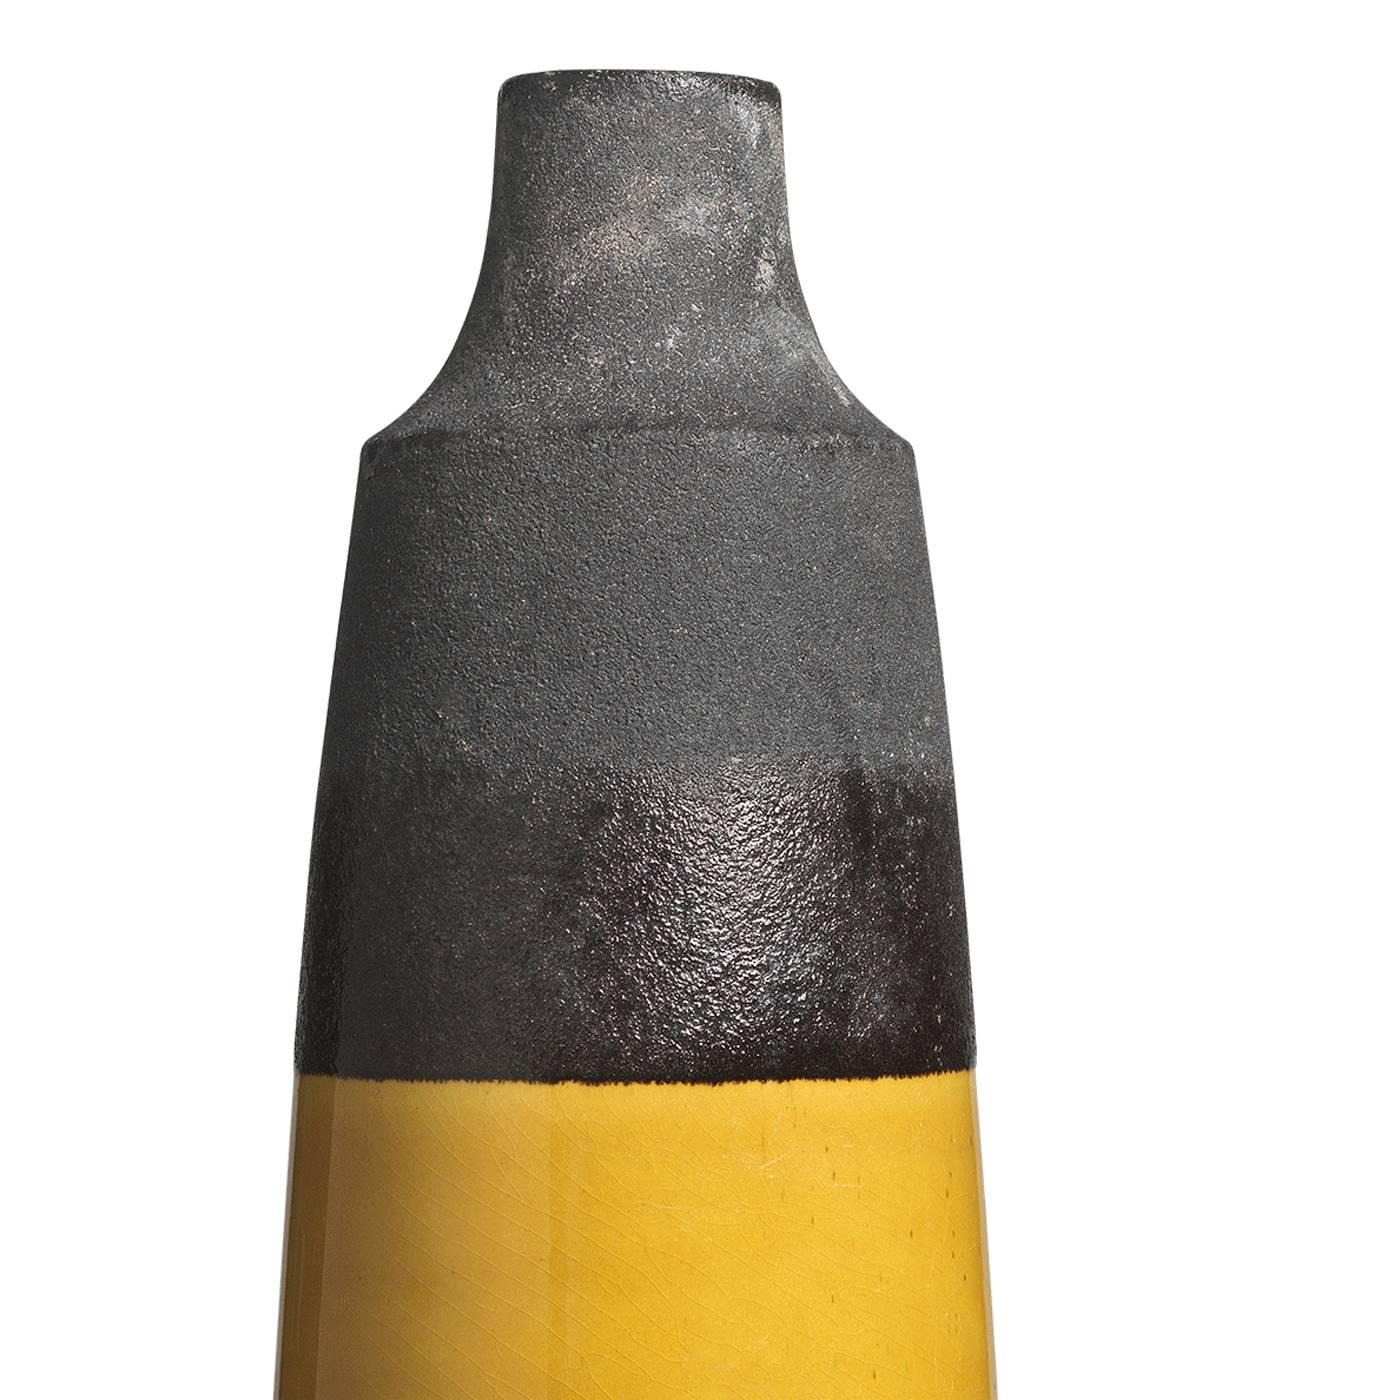 This unique vase features a tall cylinder-like shape and a slender mouth, perfect as a centerpiece holding a single flower. The color block pattern glazing the surface of the vase is in black lava on top and bright yellow on the bottom, which has a